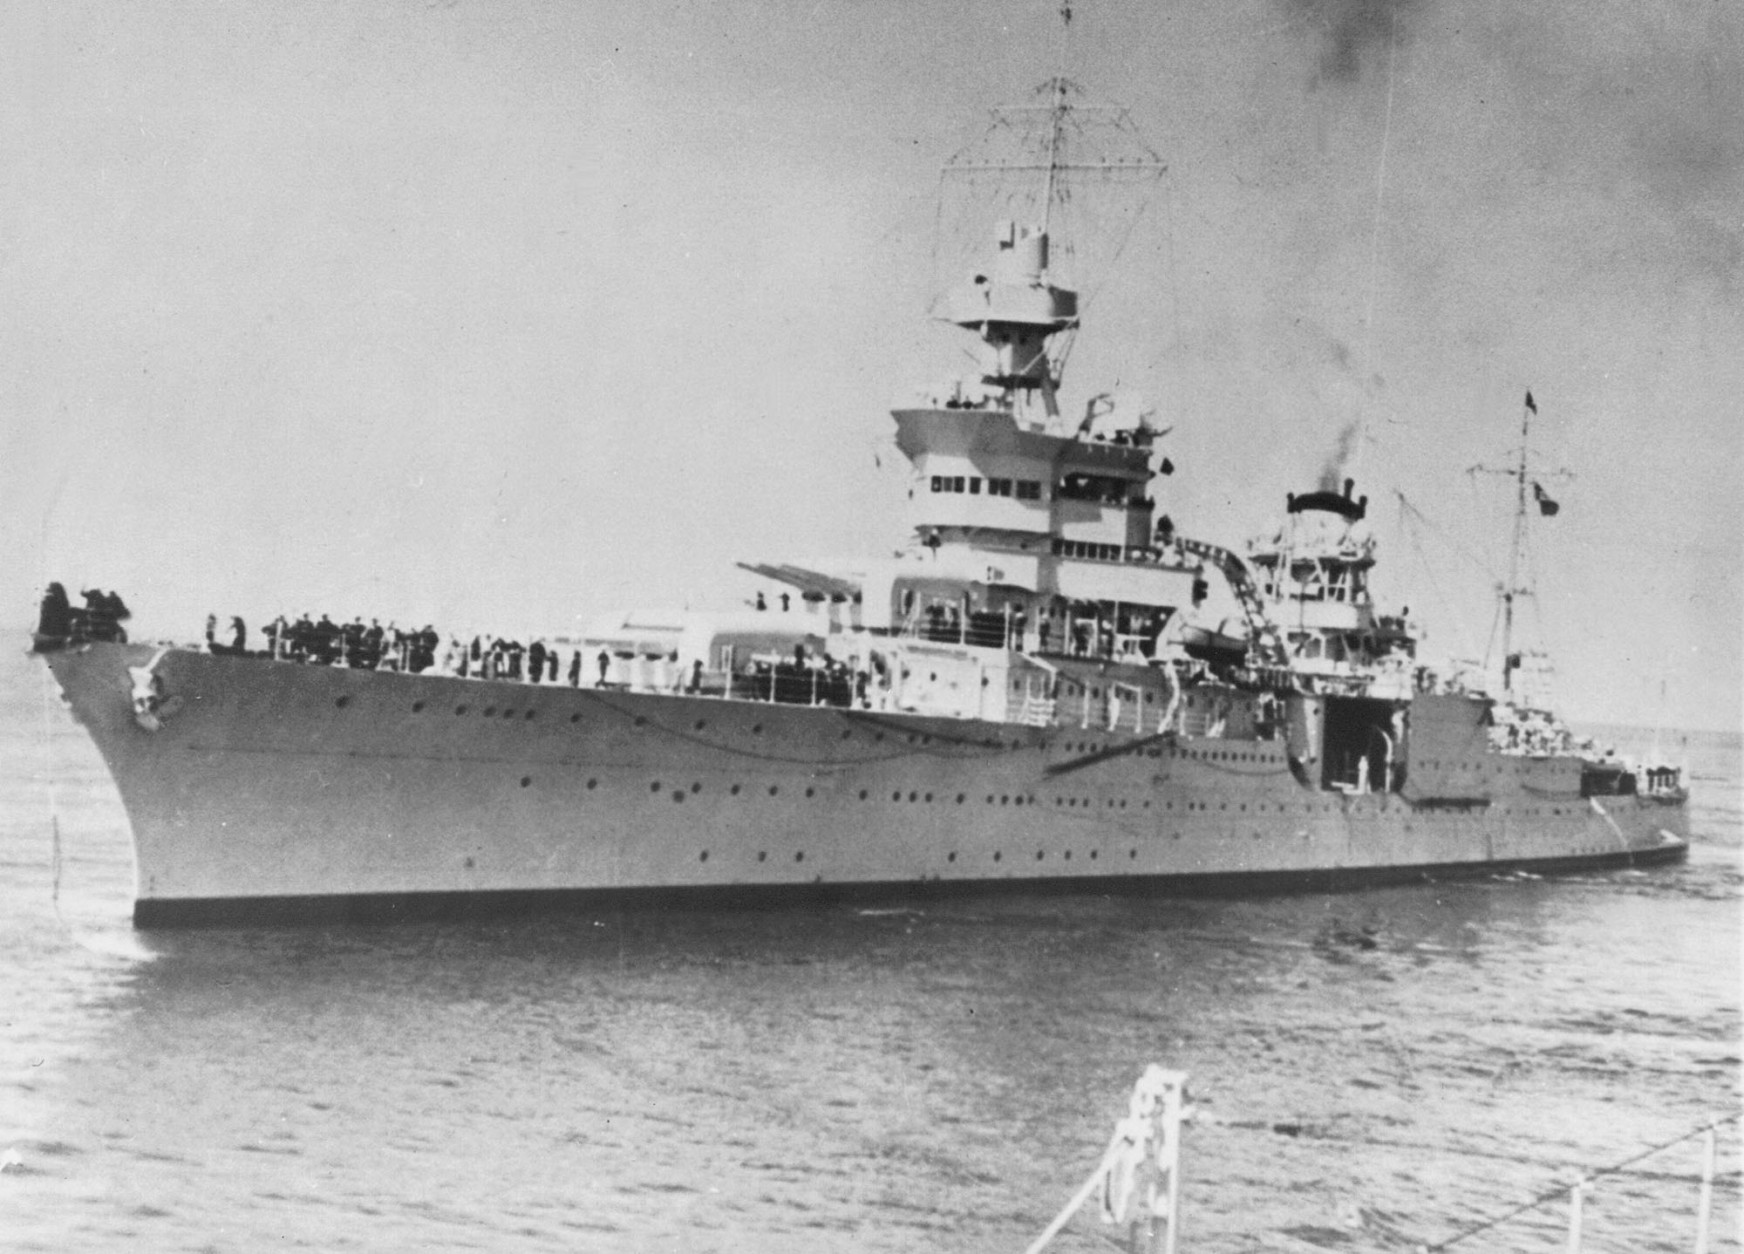 On this date in 1945, the Portland class heavy cruiser USS Indianapolis, having just delivered components of the atomic bomb to Tinian in the Mariana Islands, was torpedoed by a Japanese submarine. (AP Photo)